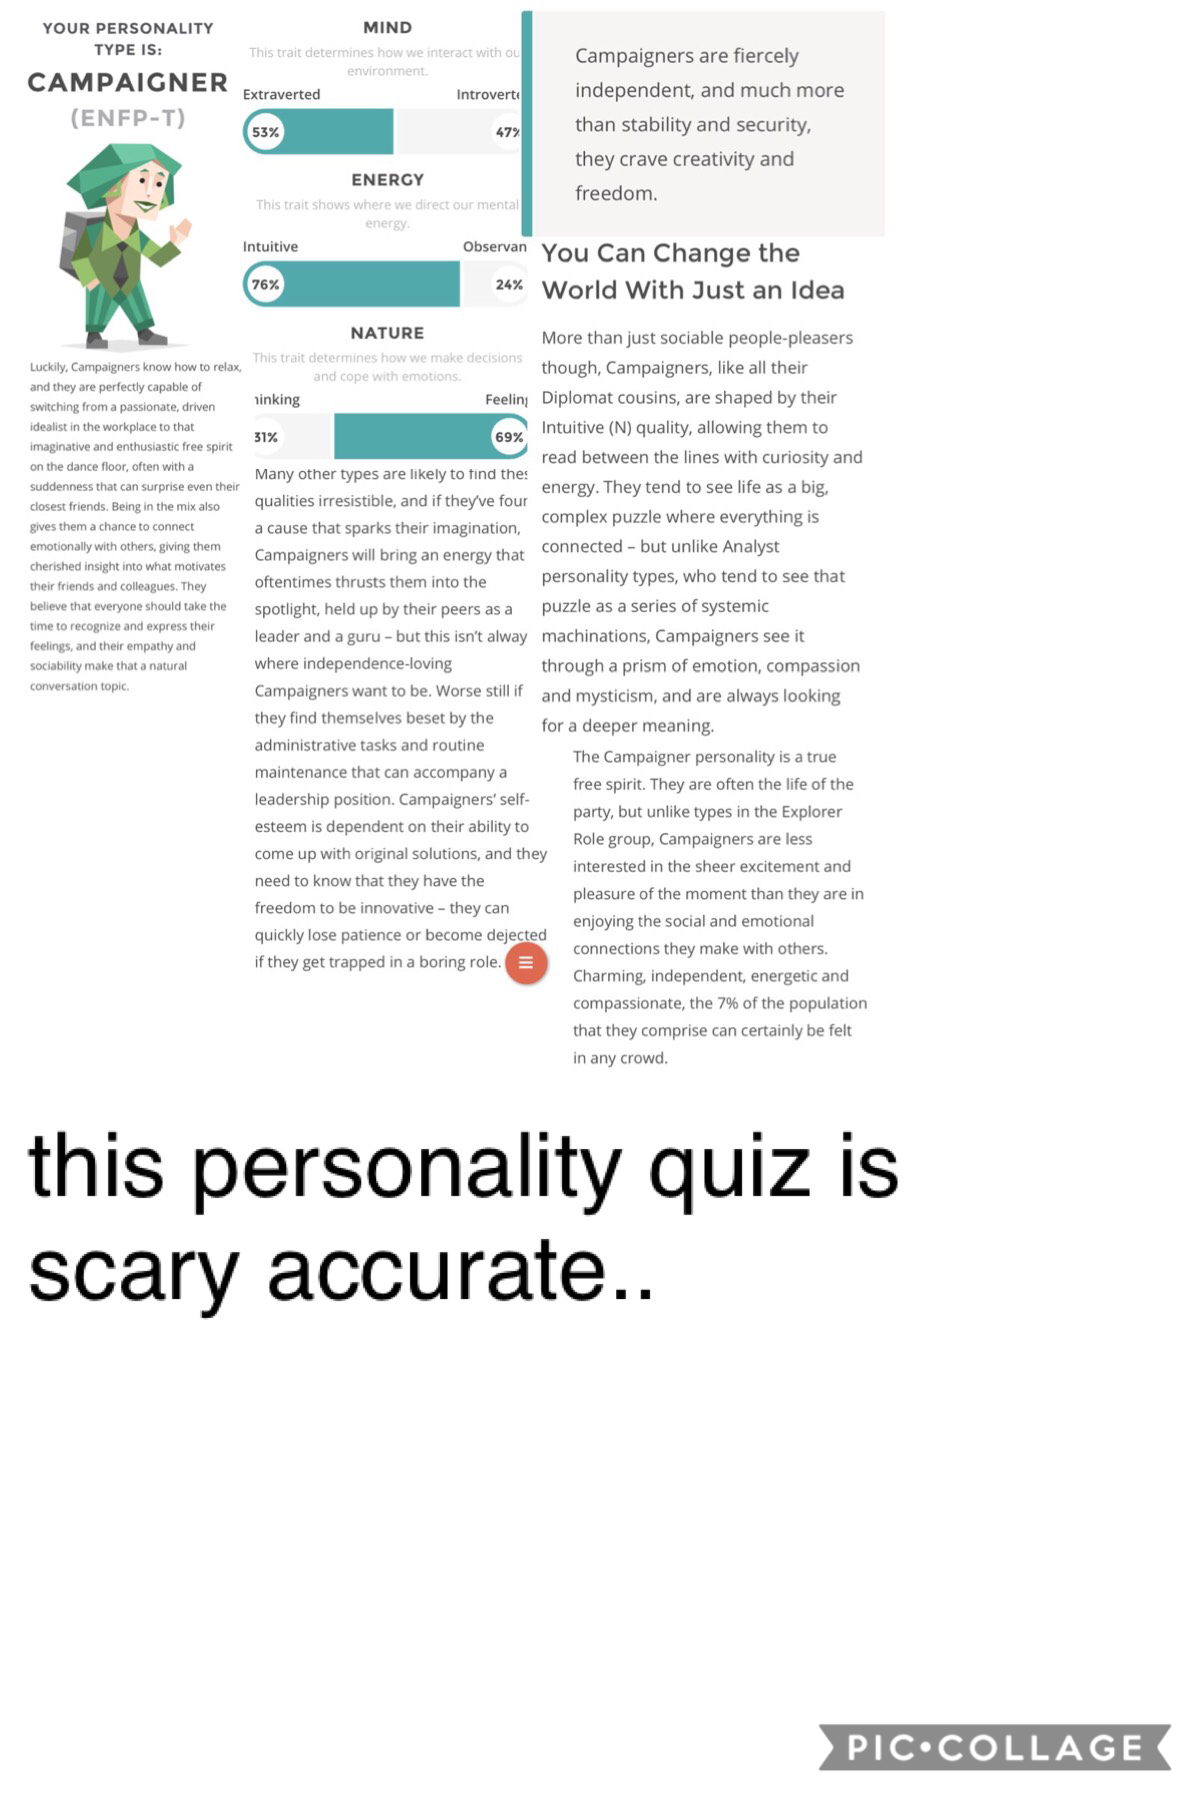 definitely take a personality quiz, they’re so cool 